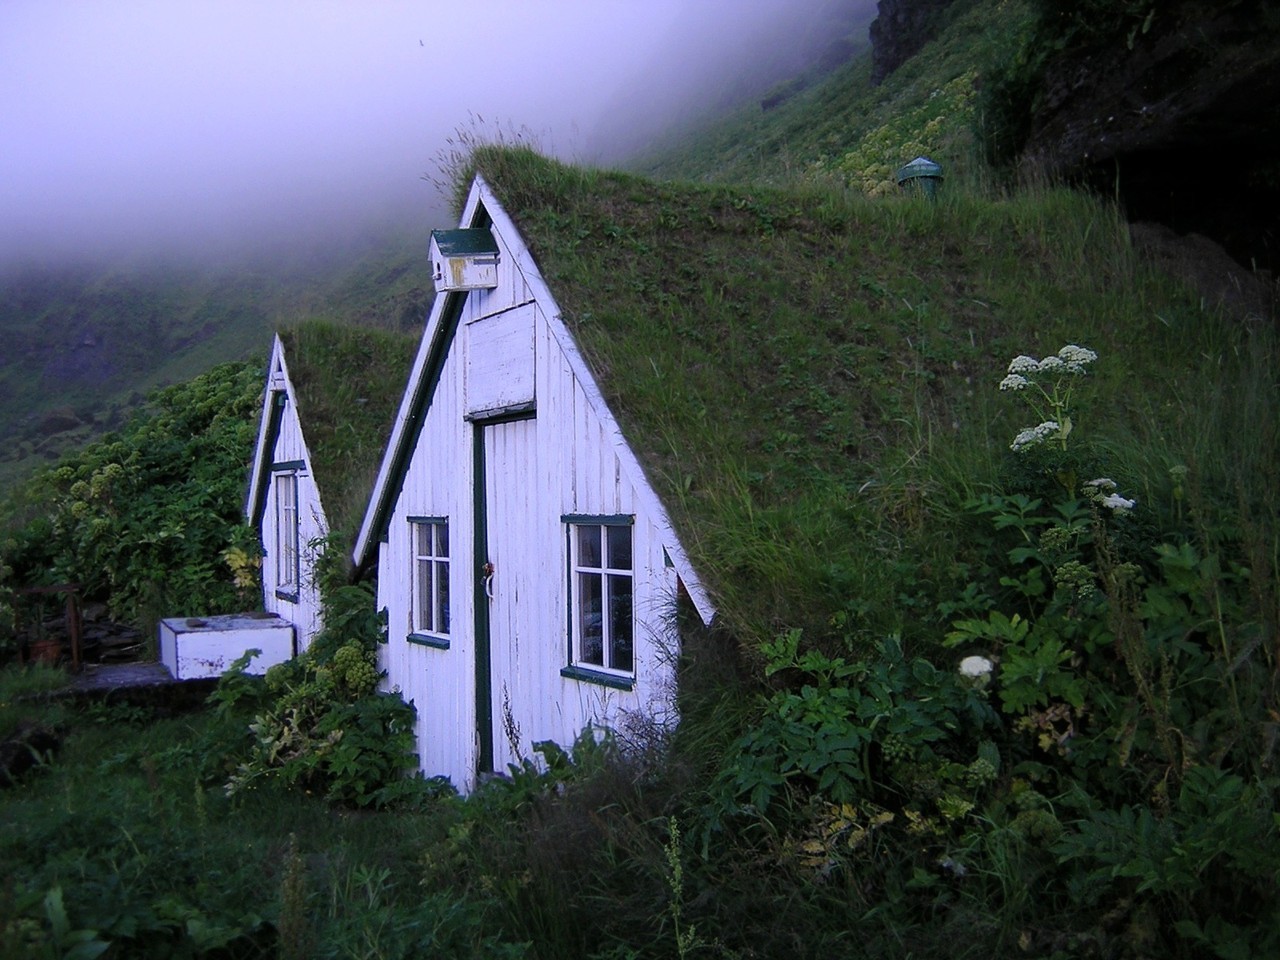 kewh:   Sod roof houses in Vik, Iceland  im pretty sure i already reblogged a different